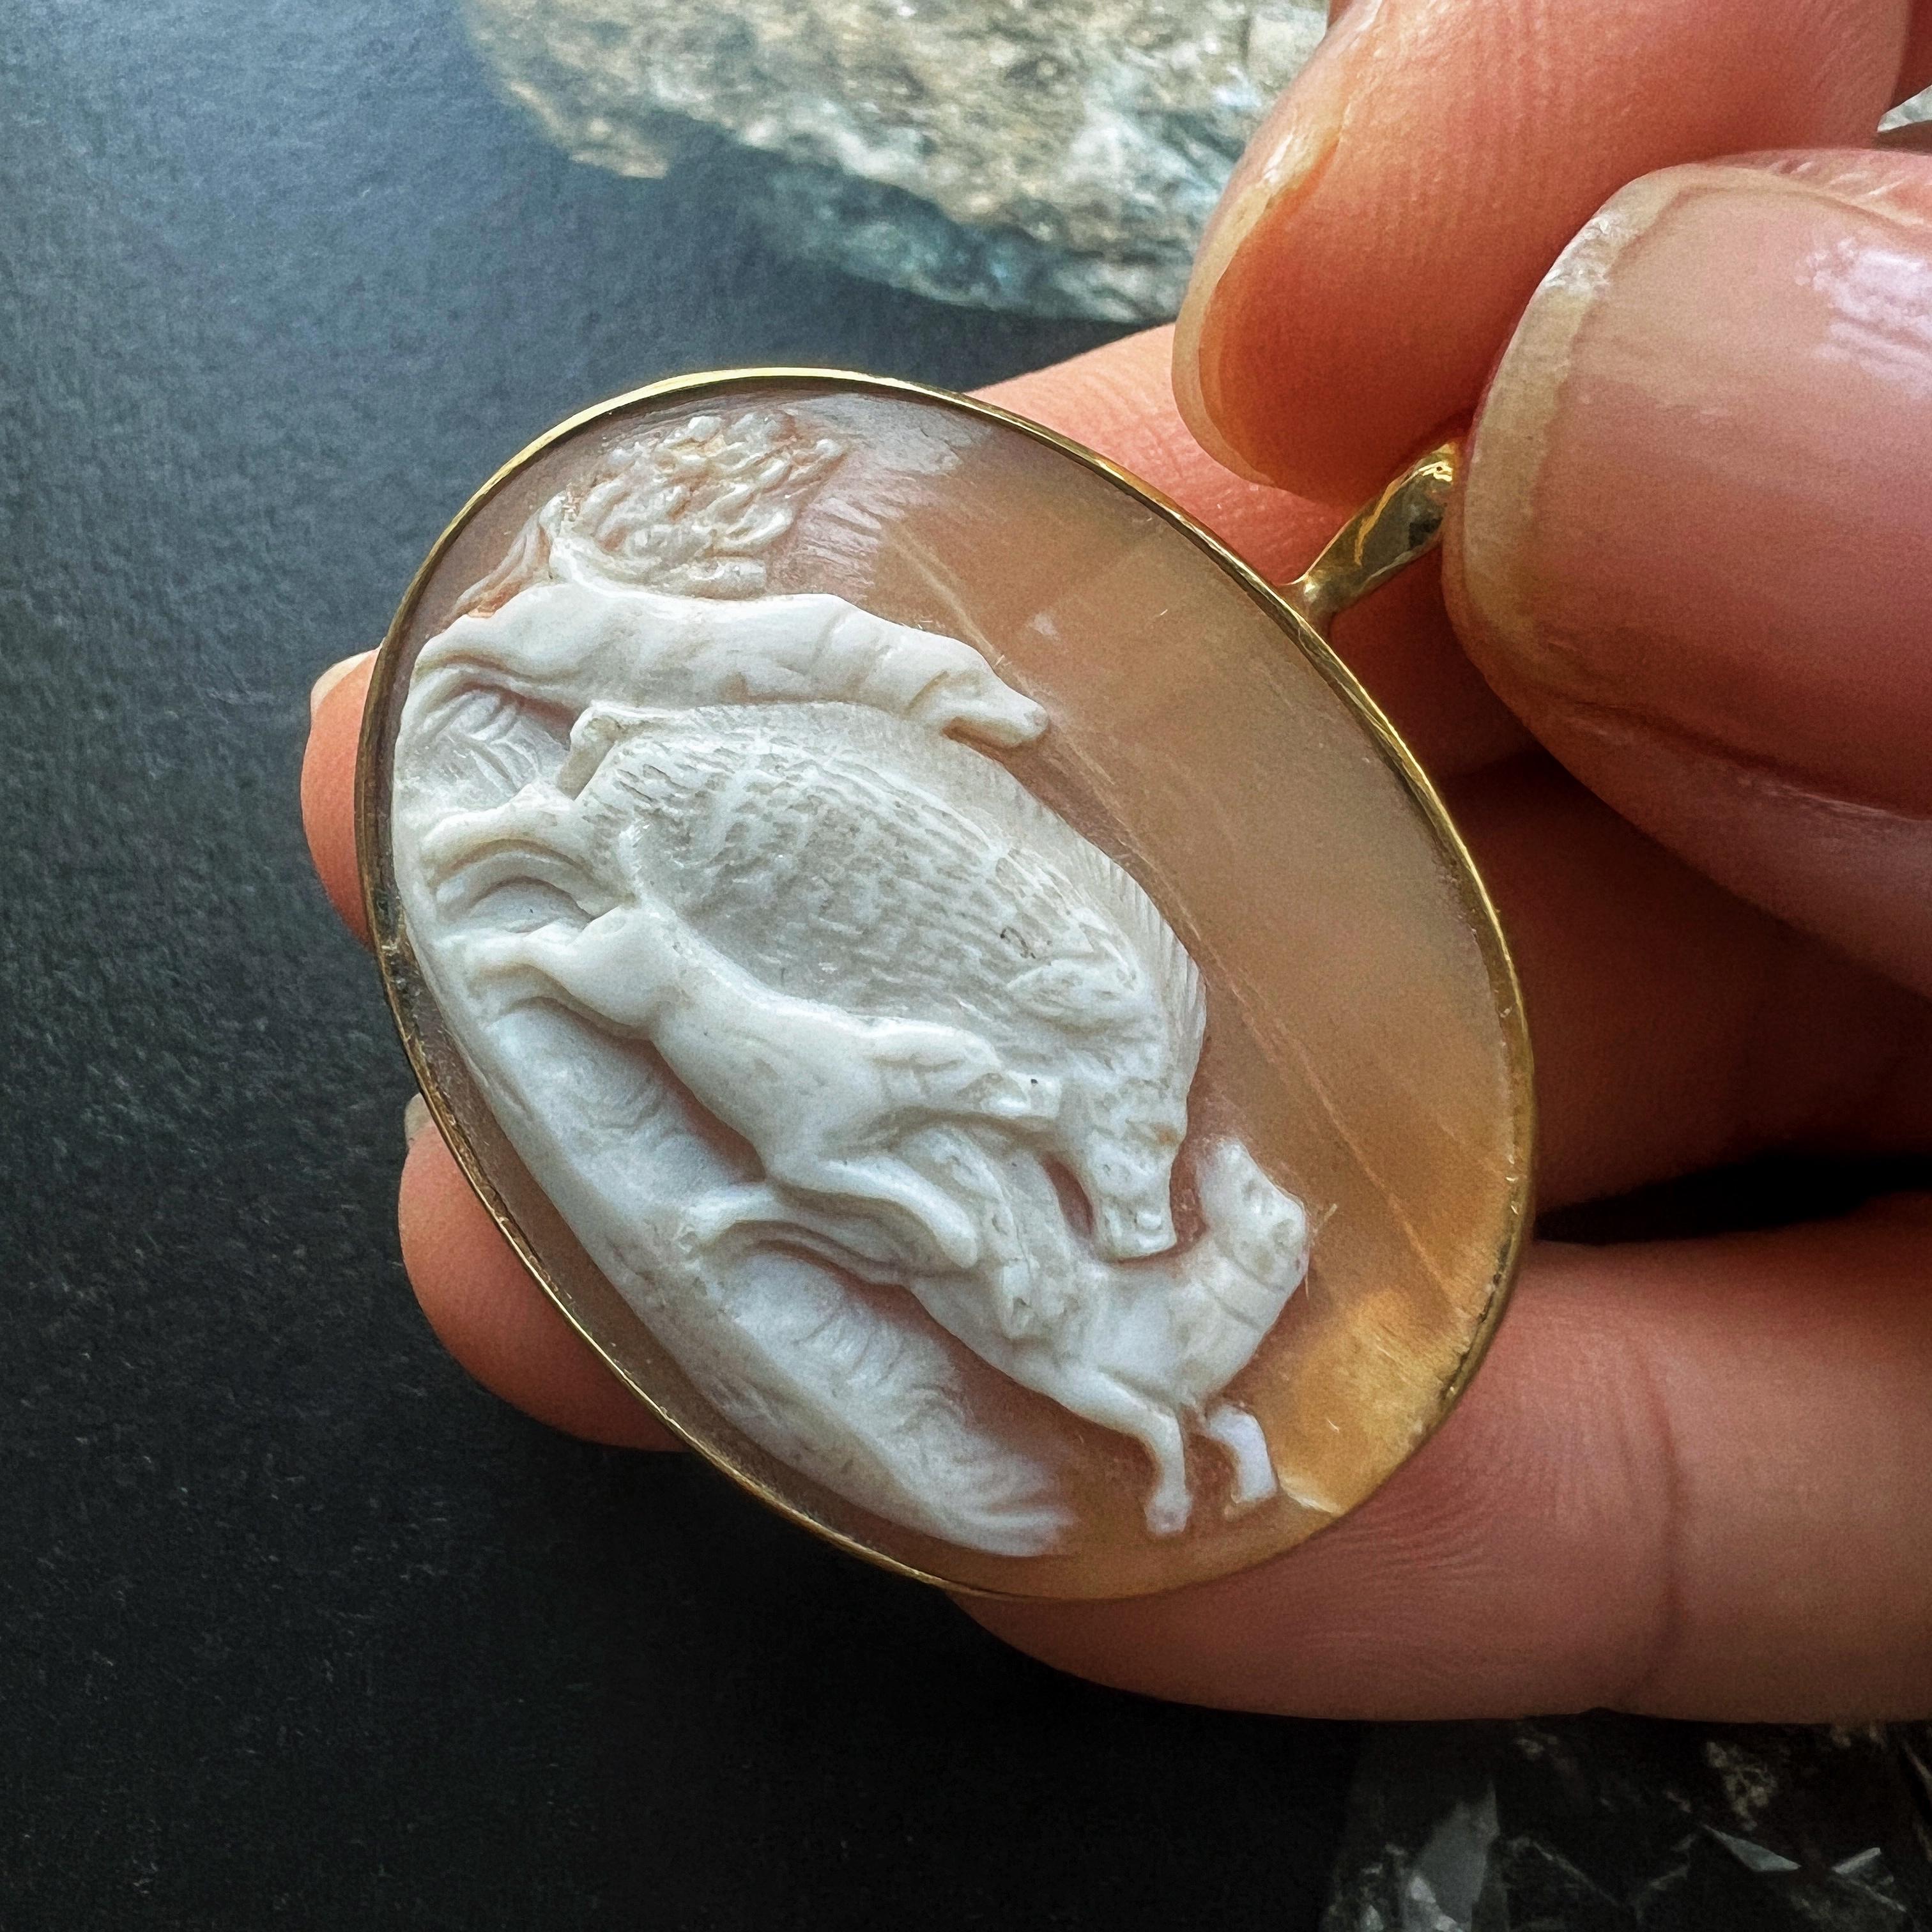 For sale a rare shell cameo, featuring three dogs chasing a wild boar. The cameo is beautifully mounted in 18K yellow gold and it is made during the 19th century, the Victorian era.

Contrary to most of the antique cameos which showcase a